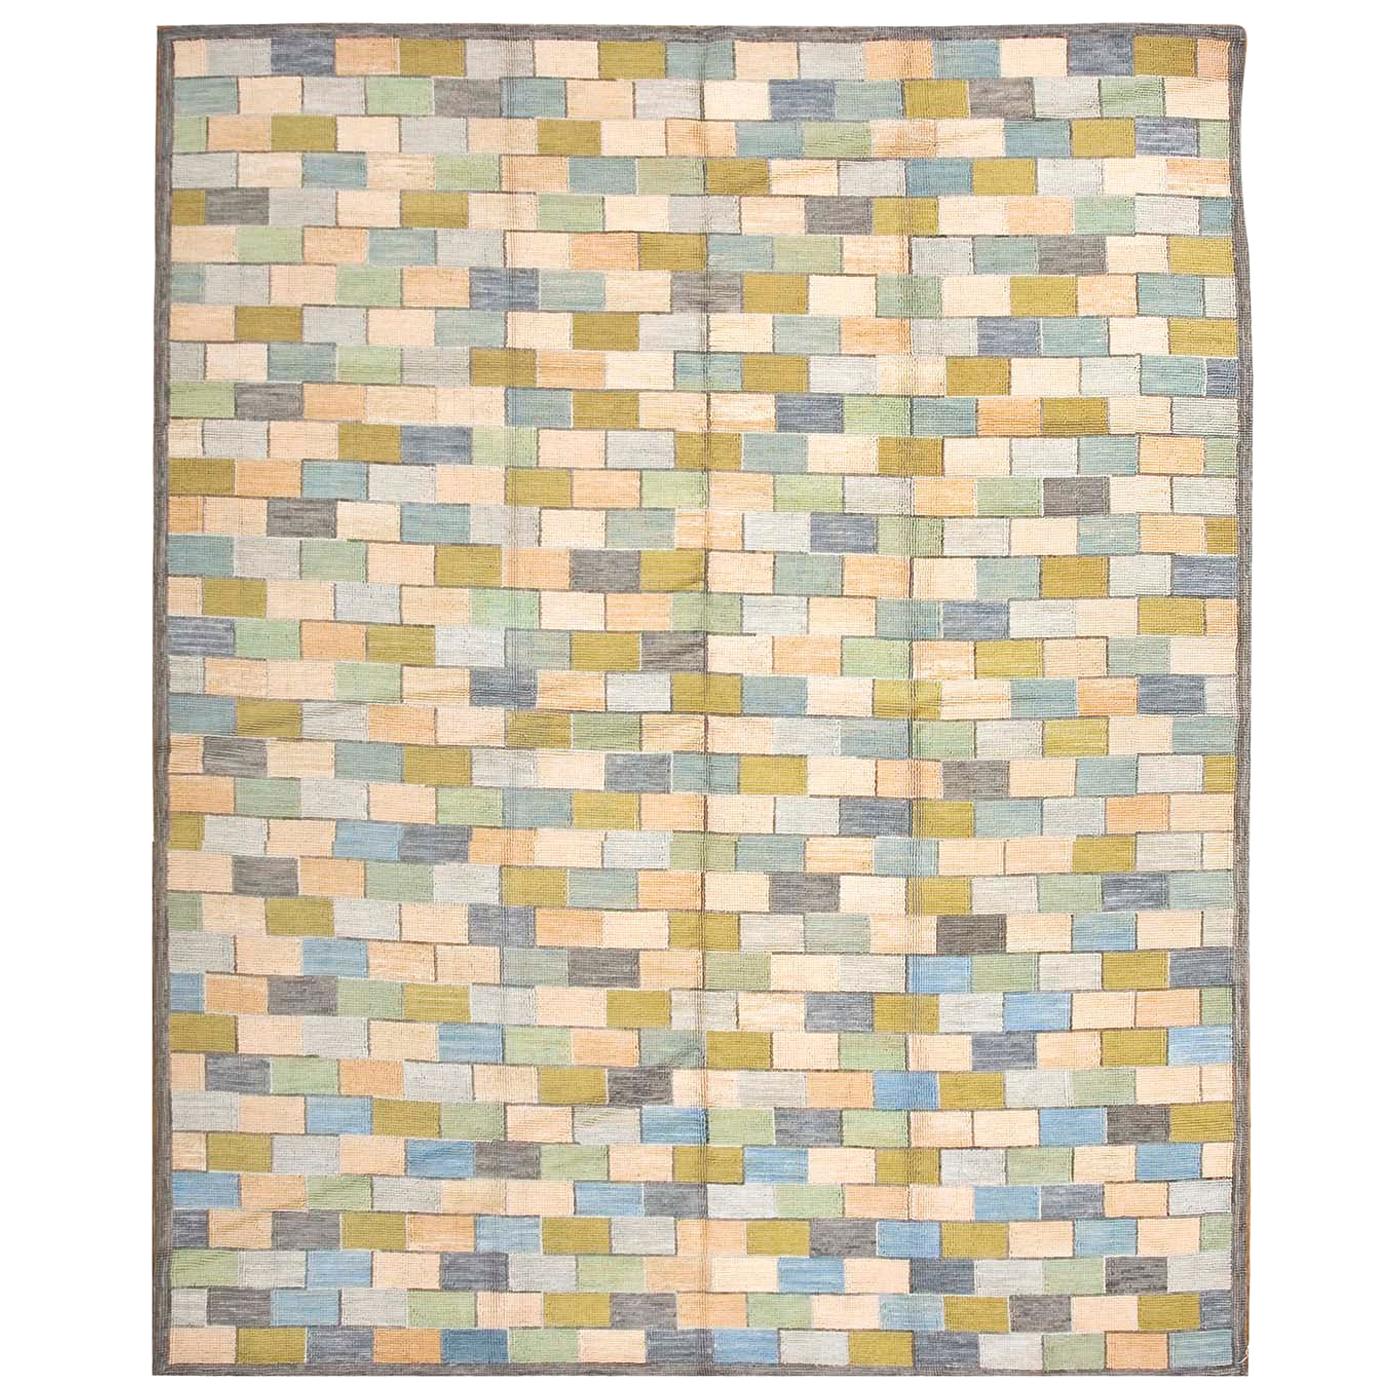 Contemporary American Cotton Hooked Rug 10' 0" x 14' 0" (305 x 427 cm)